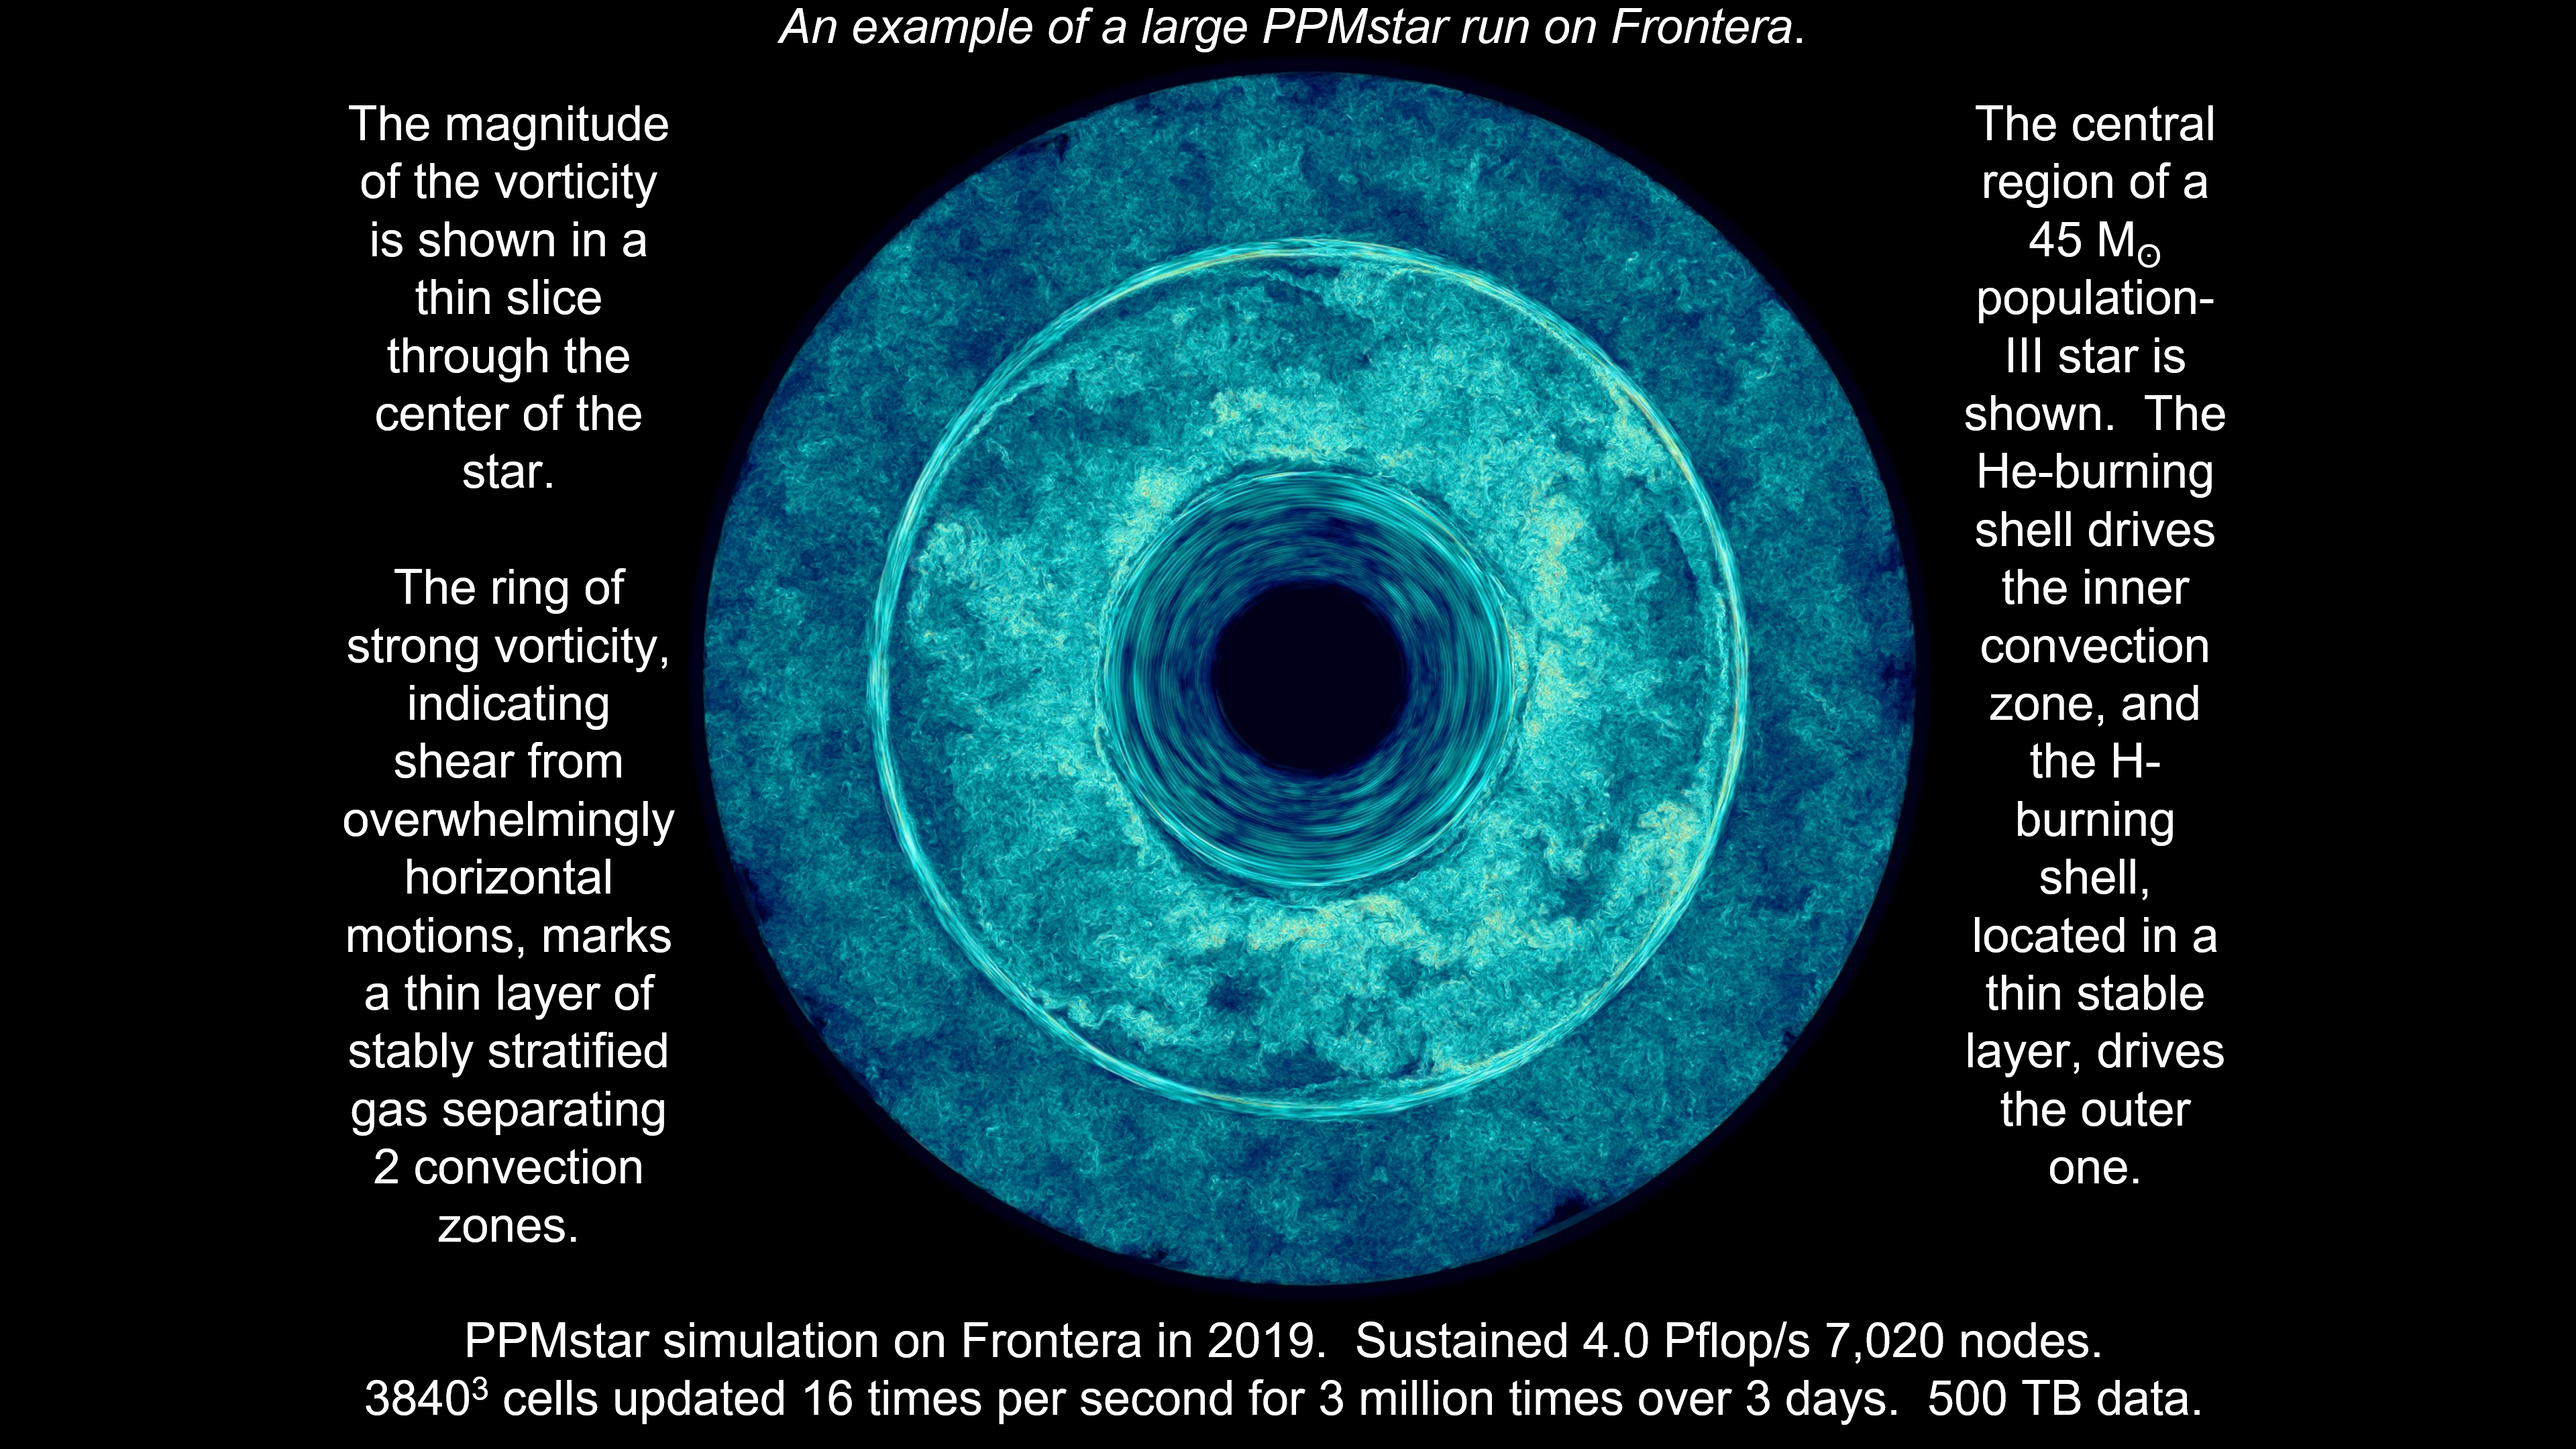 This picture shows an example of a large PPMstar run on Frontera. The magnitude of the vorticity is shown in a thin slice through the center of the star. The ring of strong vorticity, indicating shear from overwhelmingly horizontal motions, marks a thin layer of stably stratified gas separating 2 convection zones. The central region of a 45 M population-III star is shown. The He-burning shell drives the inner convection zone, and the H-burning shell, located in a thin stable layer, drives the outer one. 